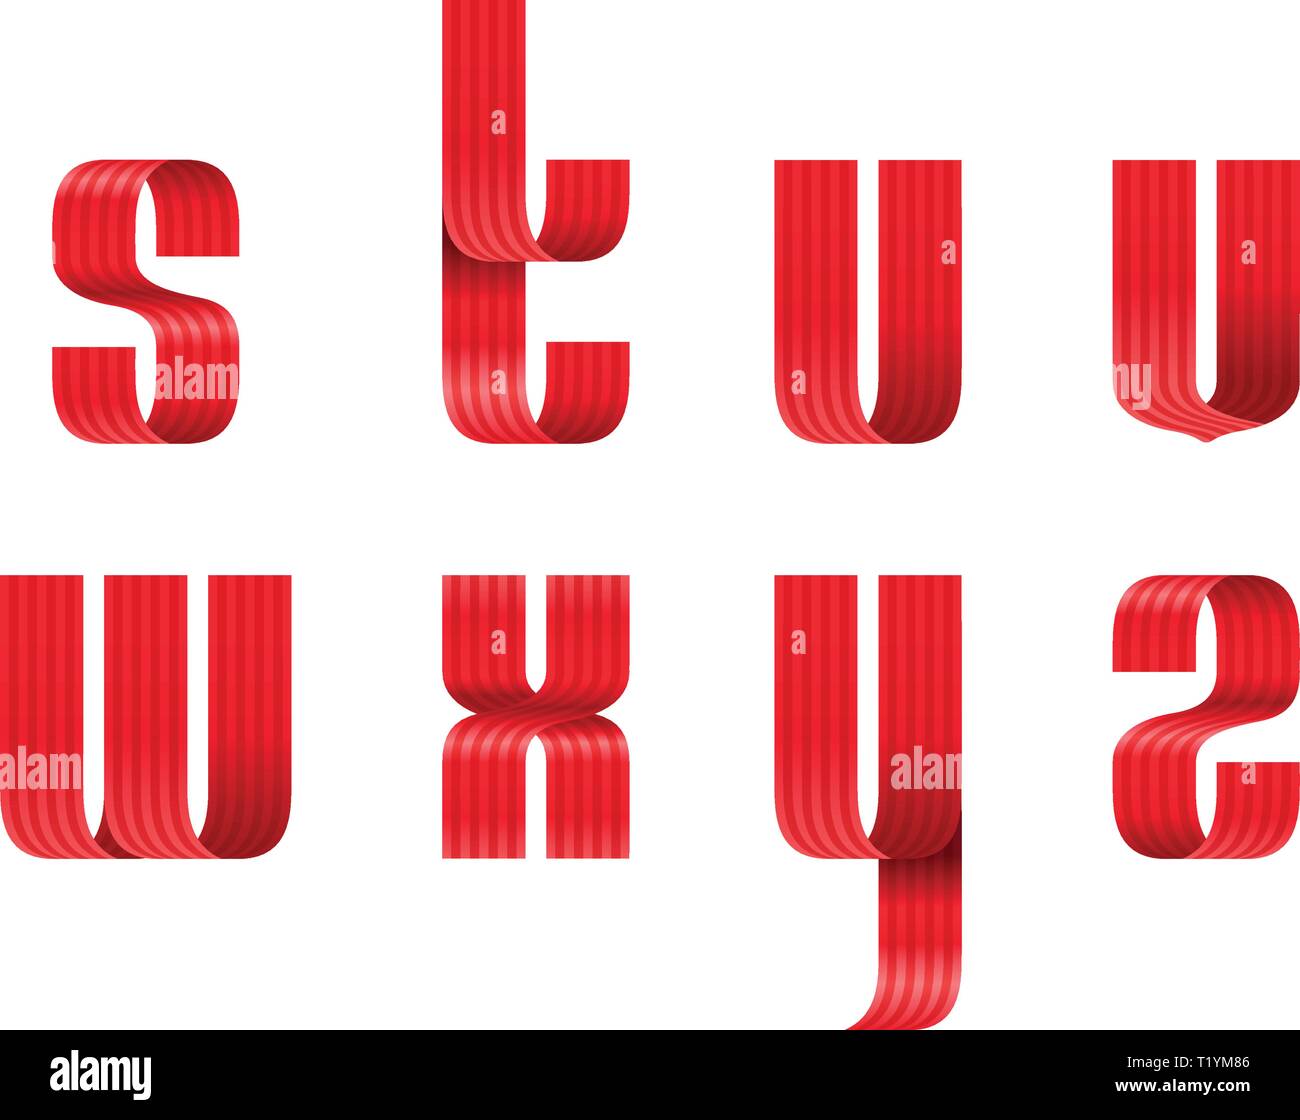 S T U V W X Y Z Lowercase Letters Font From A Red Ribbon With Strip And Smooth Curves And Shadows Stock Vector Image Art Alamy